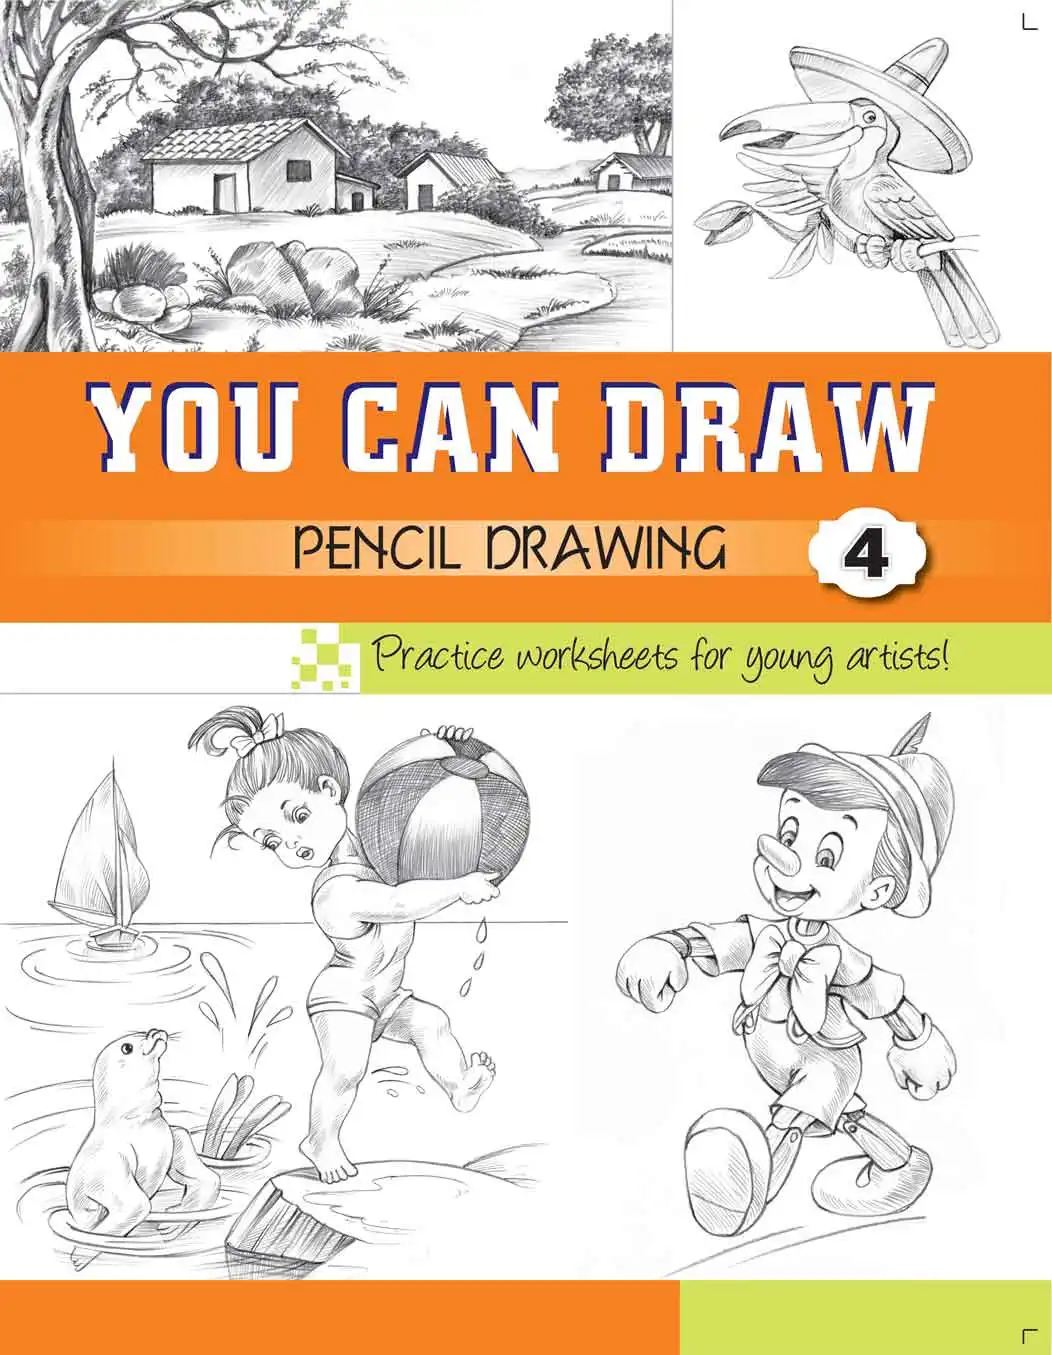 How to draw Vegetables in a basket - Class 4 Drawing - YouTube-saigonsouth.com.vn